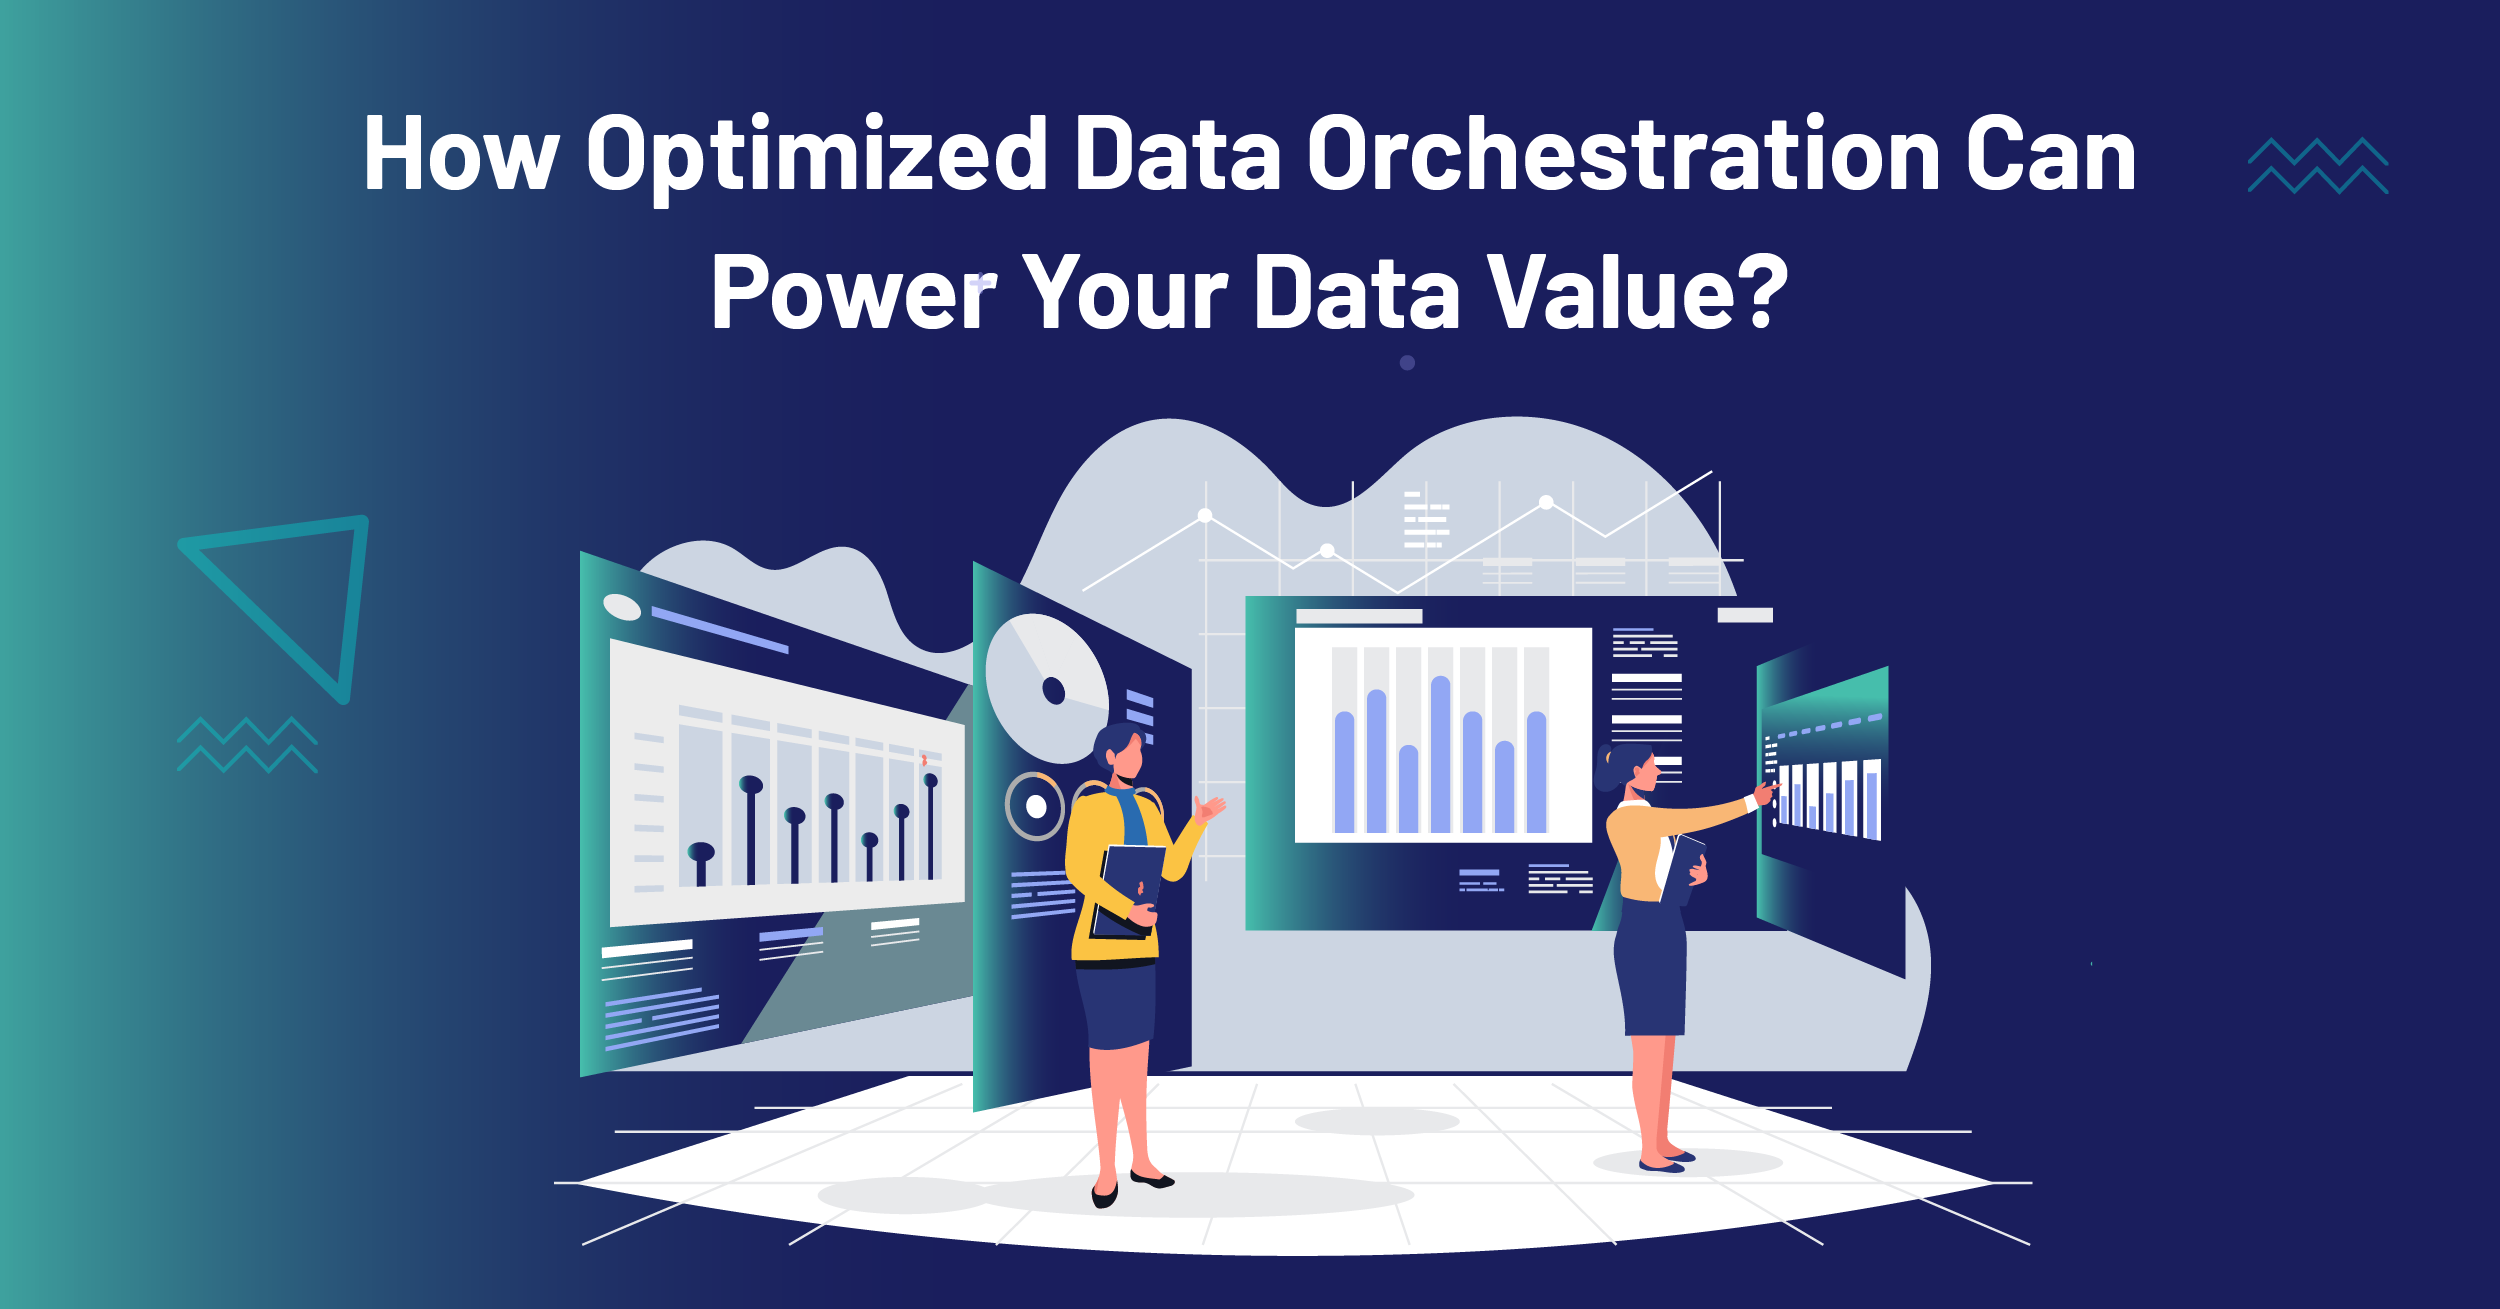 How Optimized Data Orchestration Can Power Your Data Value?